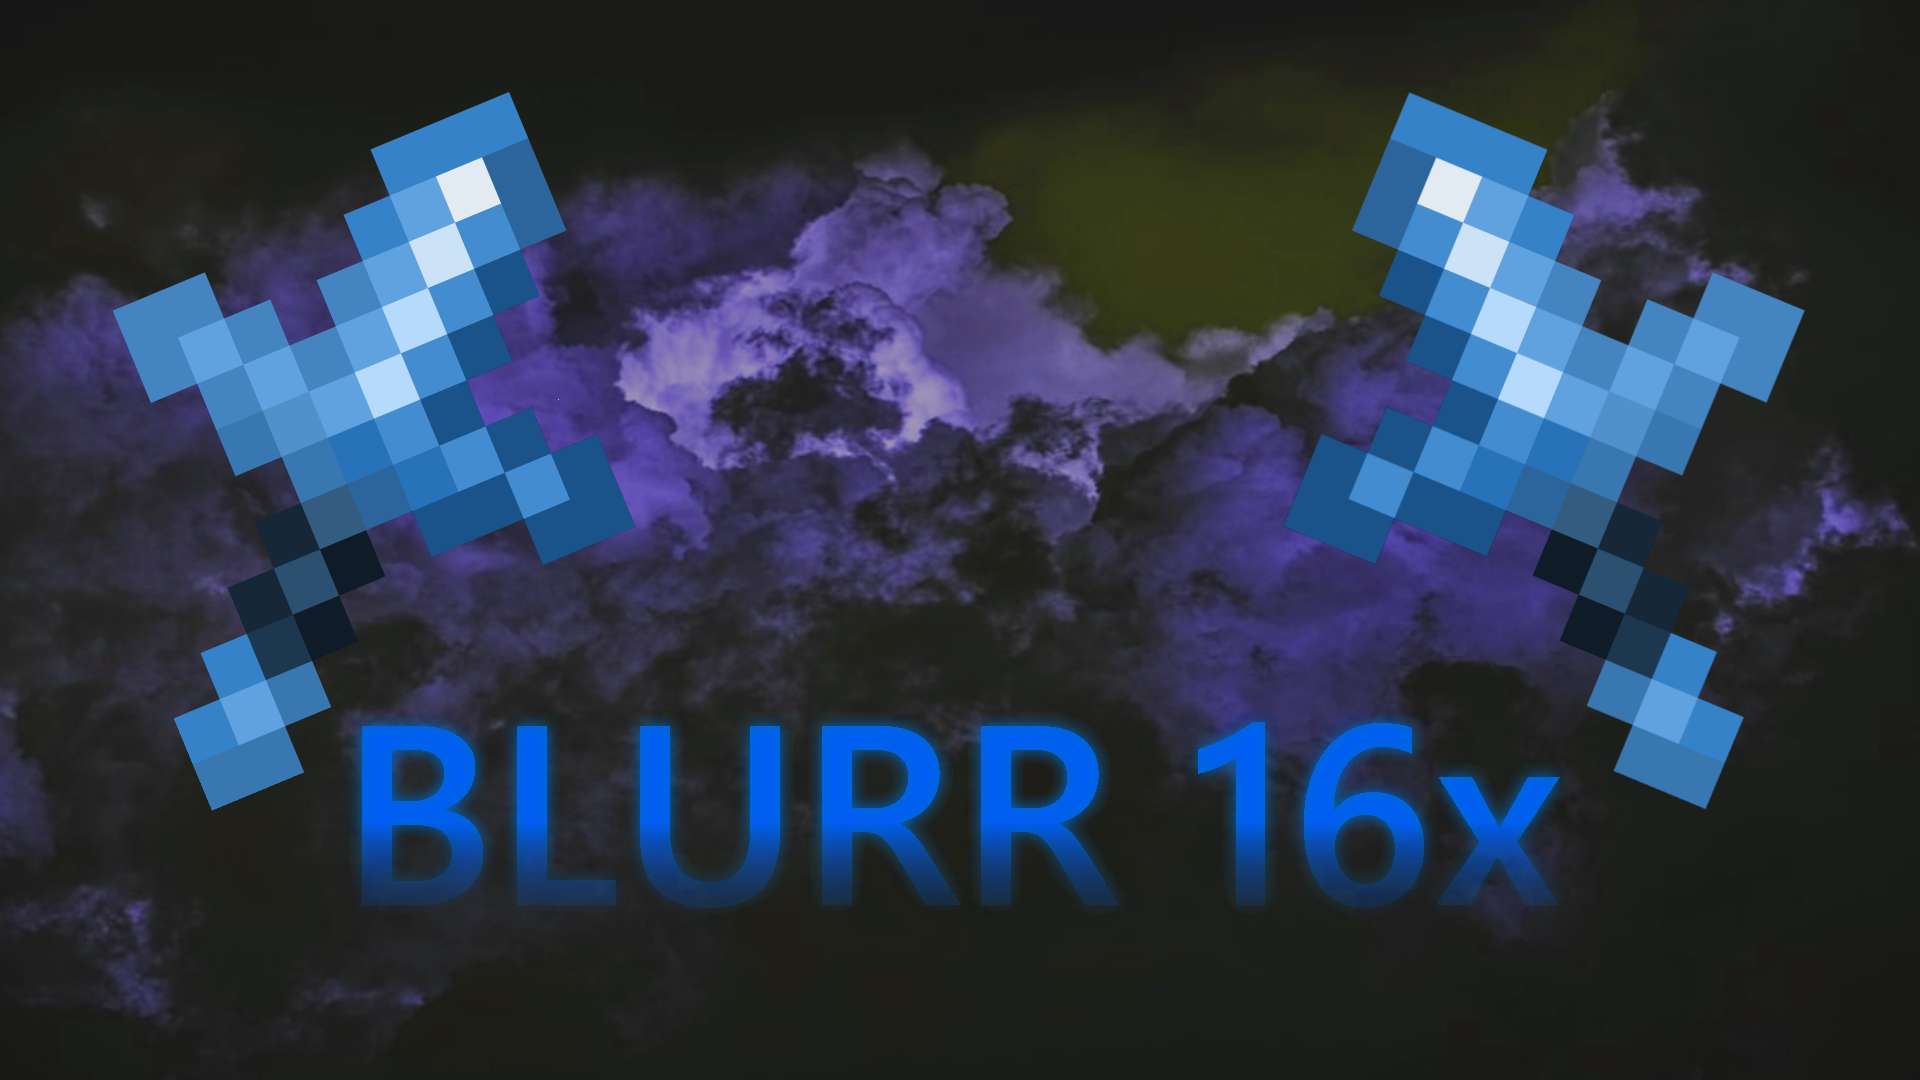 Blurr Vanilla 16x by Scnk on PvPRP